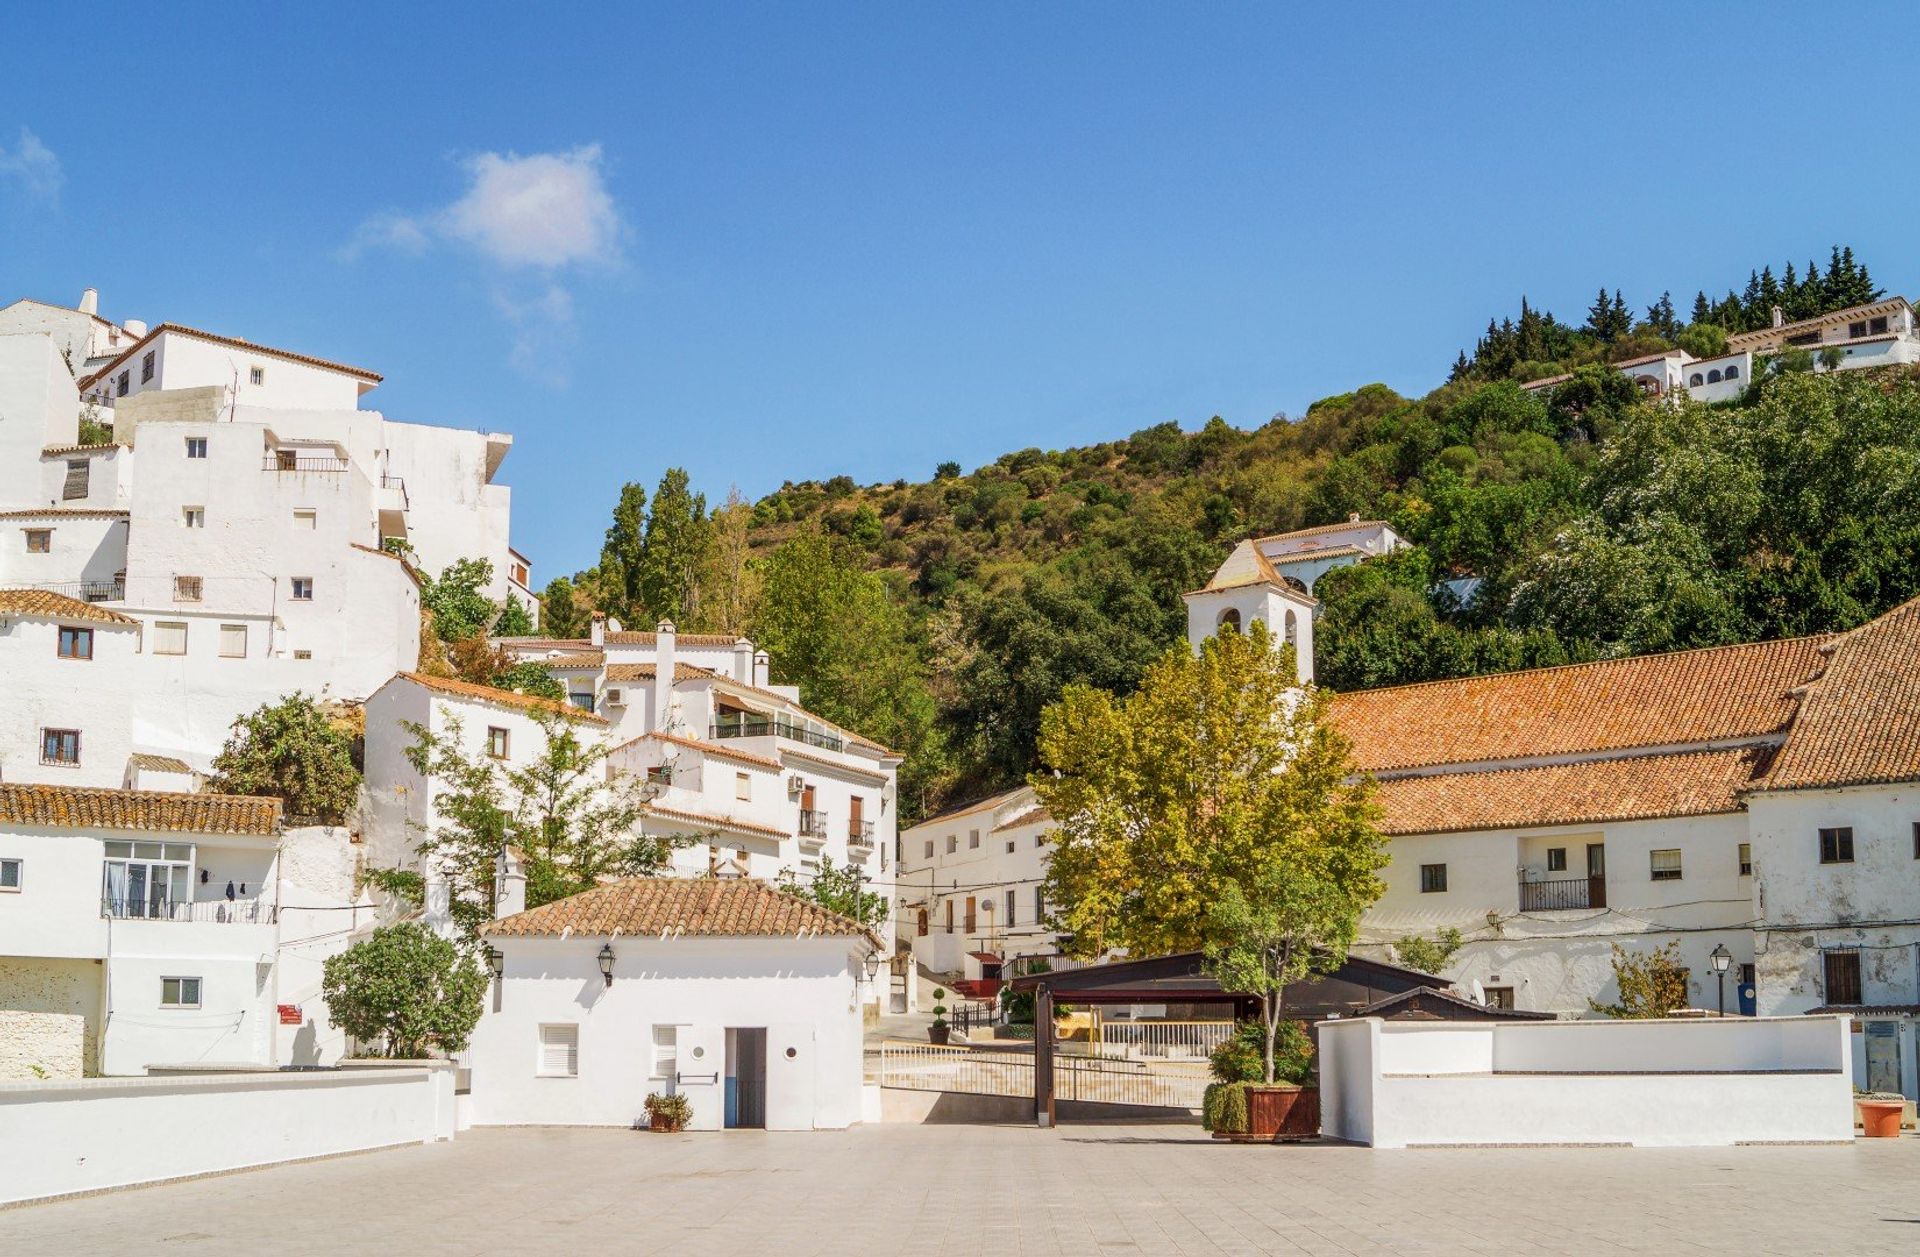  Delight in the charms of a traditional Andalucian village, with whitewashed houses scattered along Casares' old town.